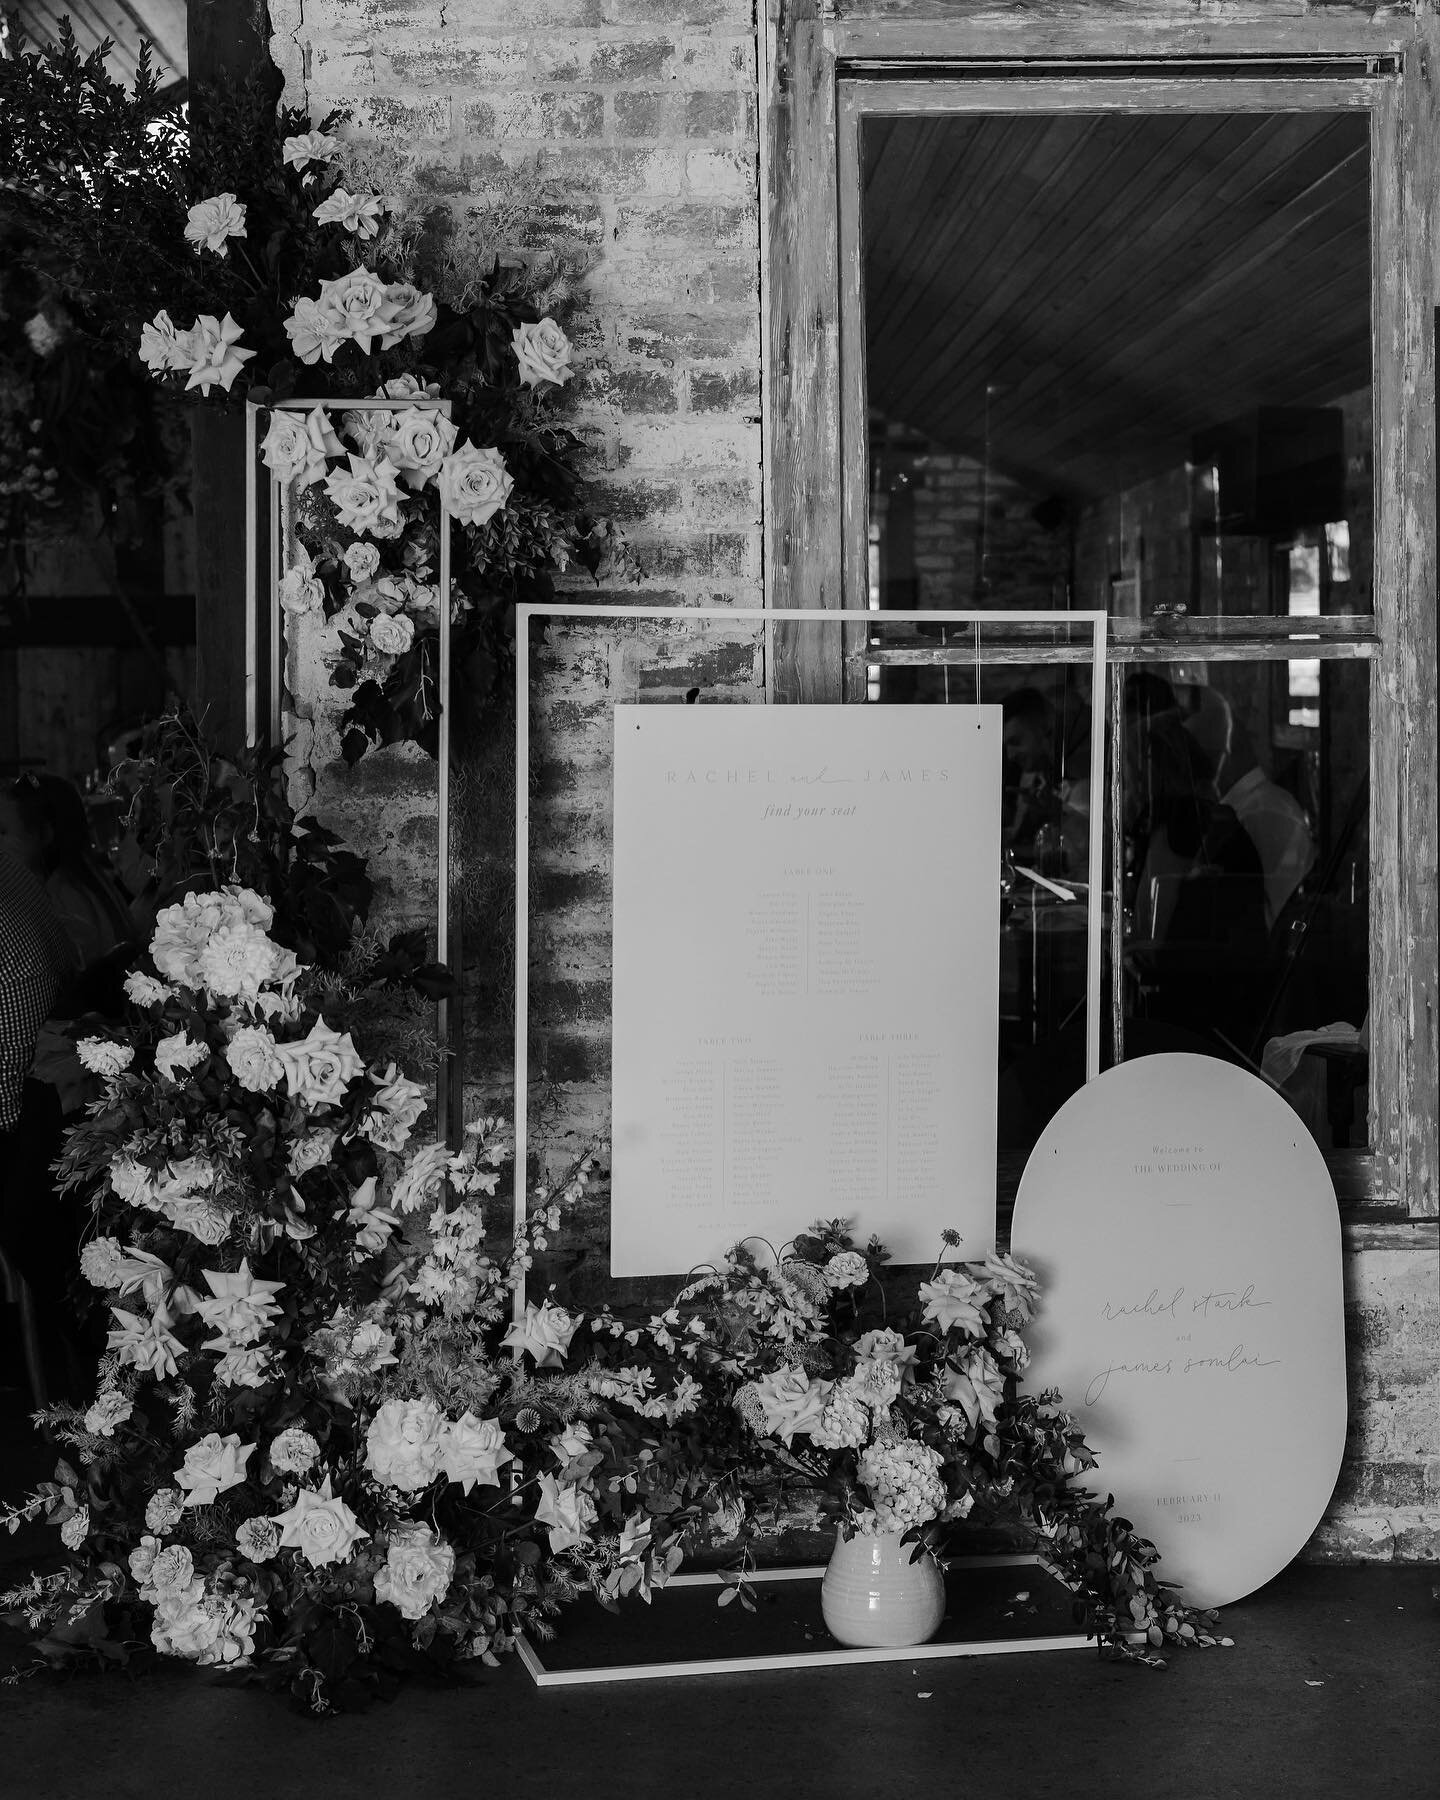 Our favourite snaps from Rachel &amp; James&rsquo; fairytale wedding 🤍 rustic romance meets clean &amp; classy, and we couldn&rsquo;t love it more!

Swipe to the end to have your day made 🥲

The fabulous team behind this day:
Photography @hellochlo